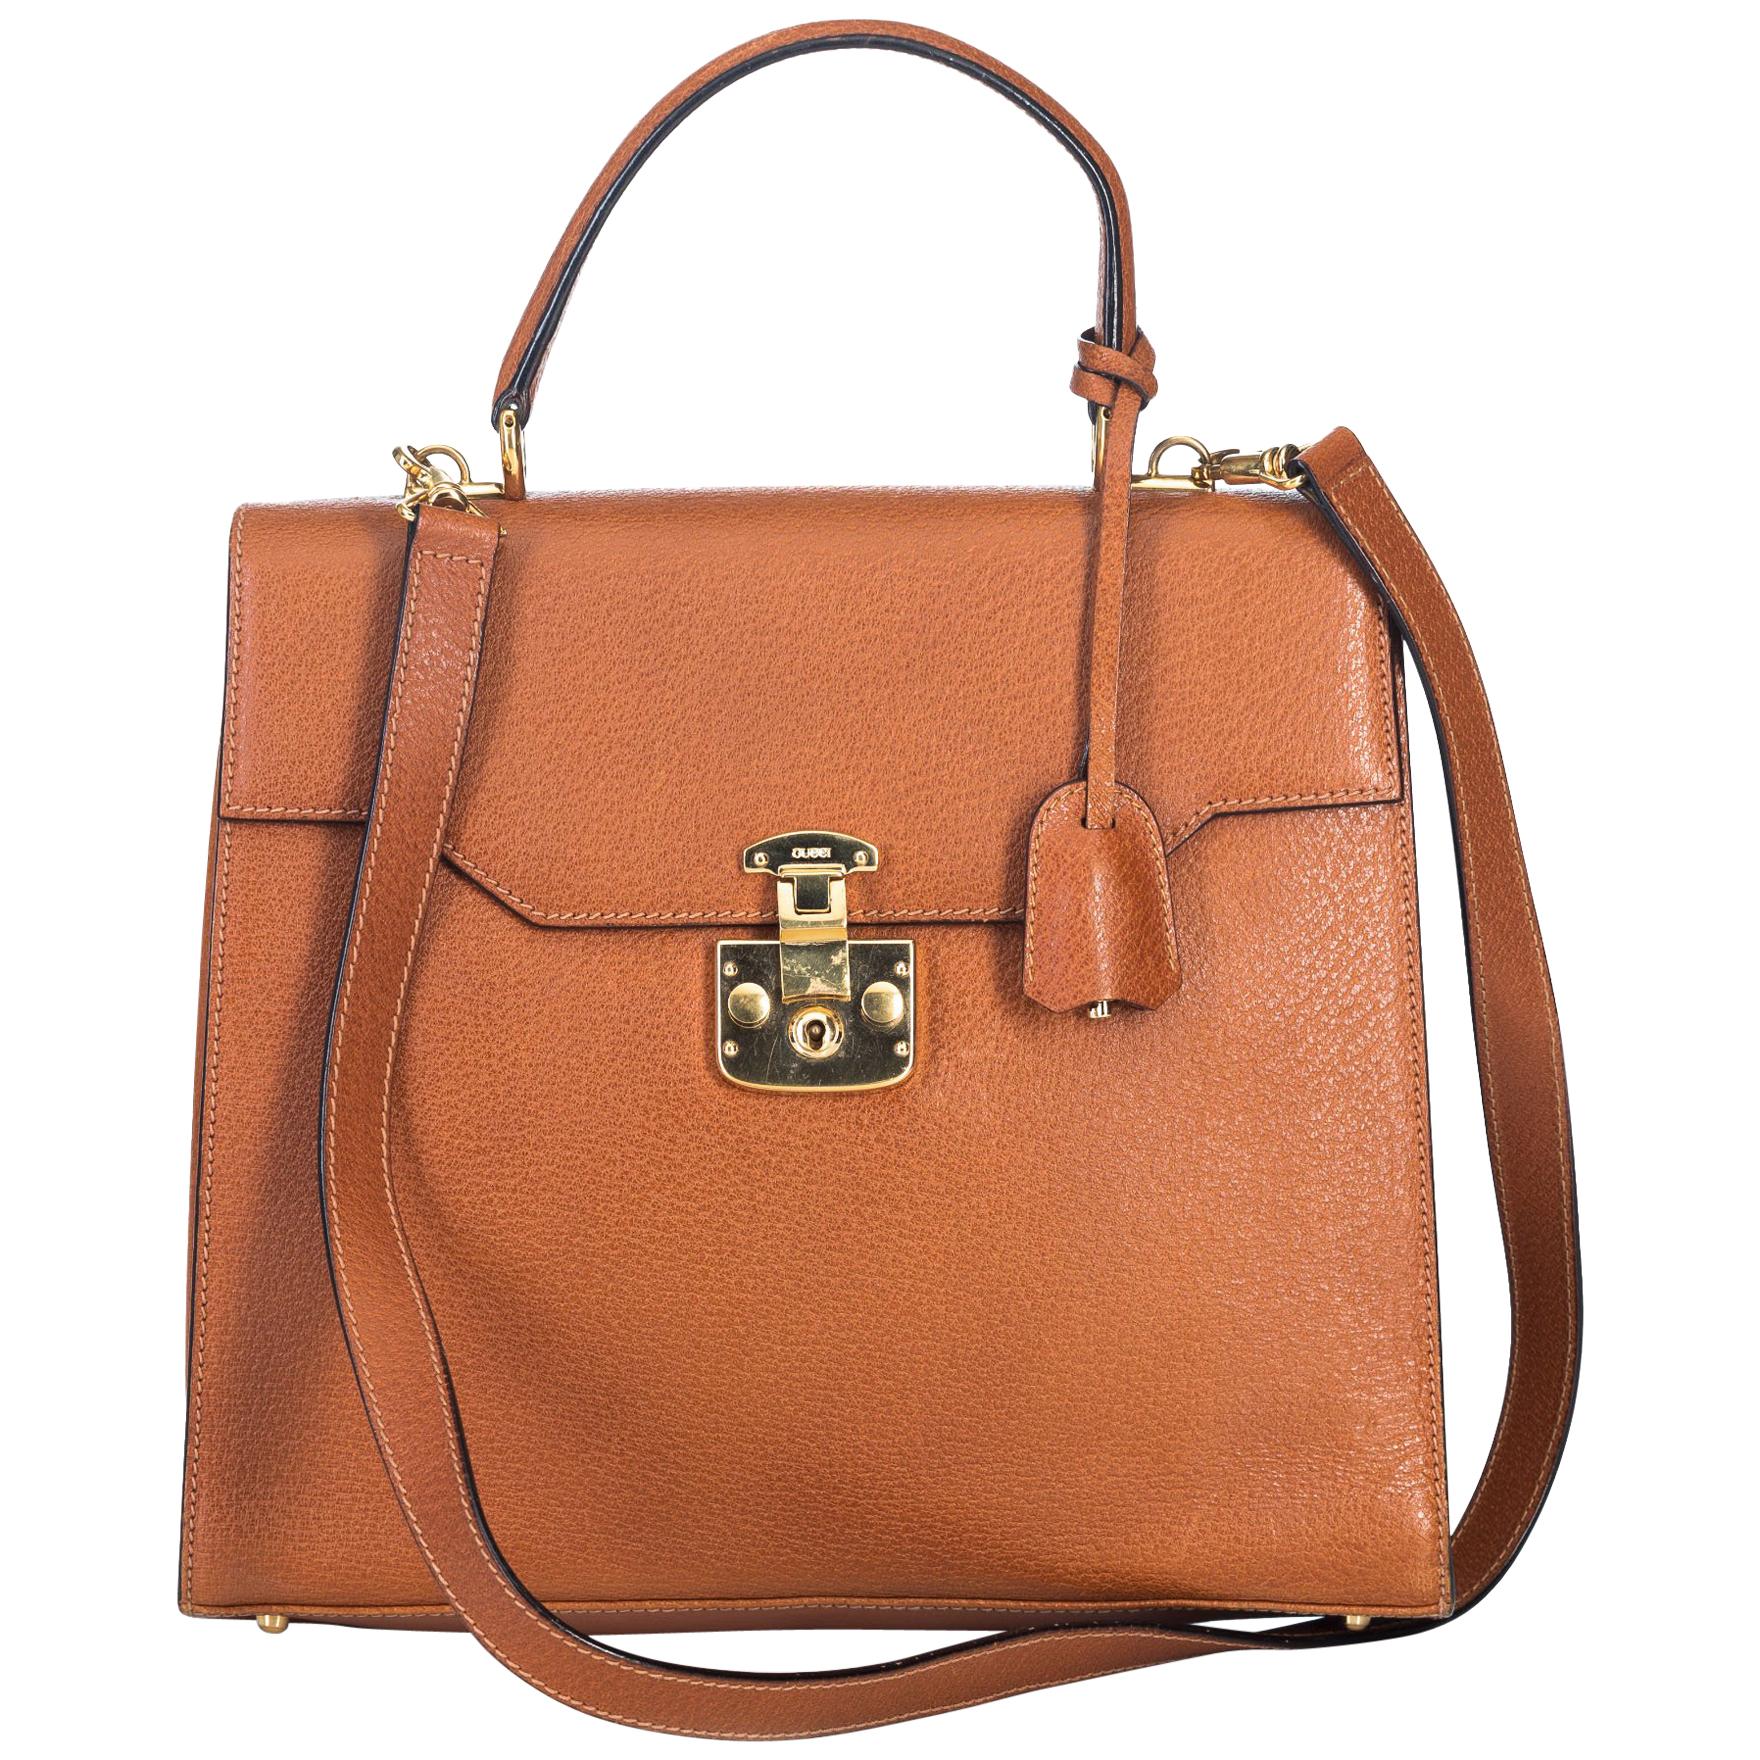 Gucci Brown Leather Kelly Satchel For Sale